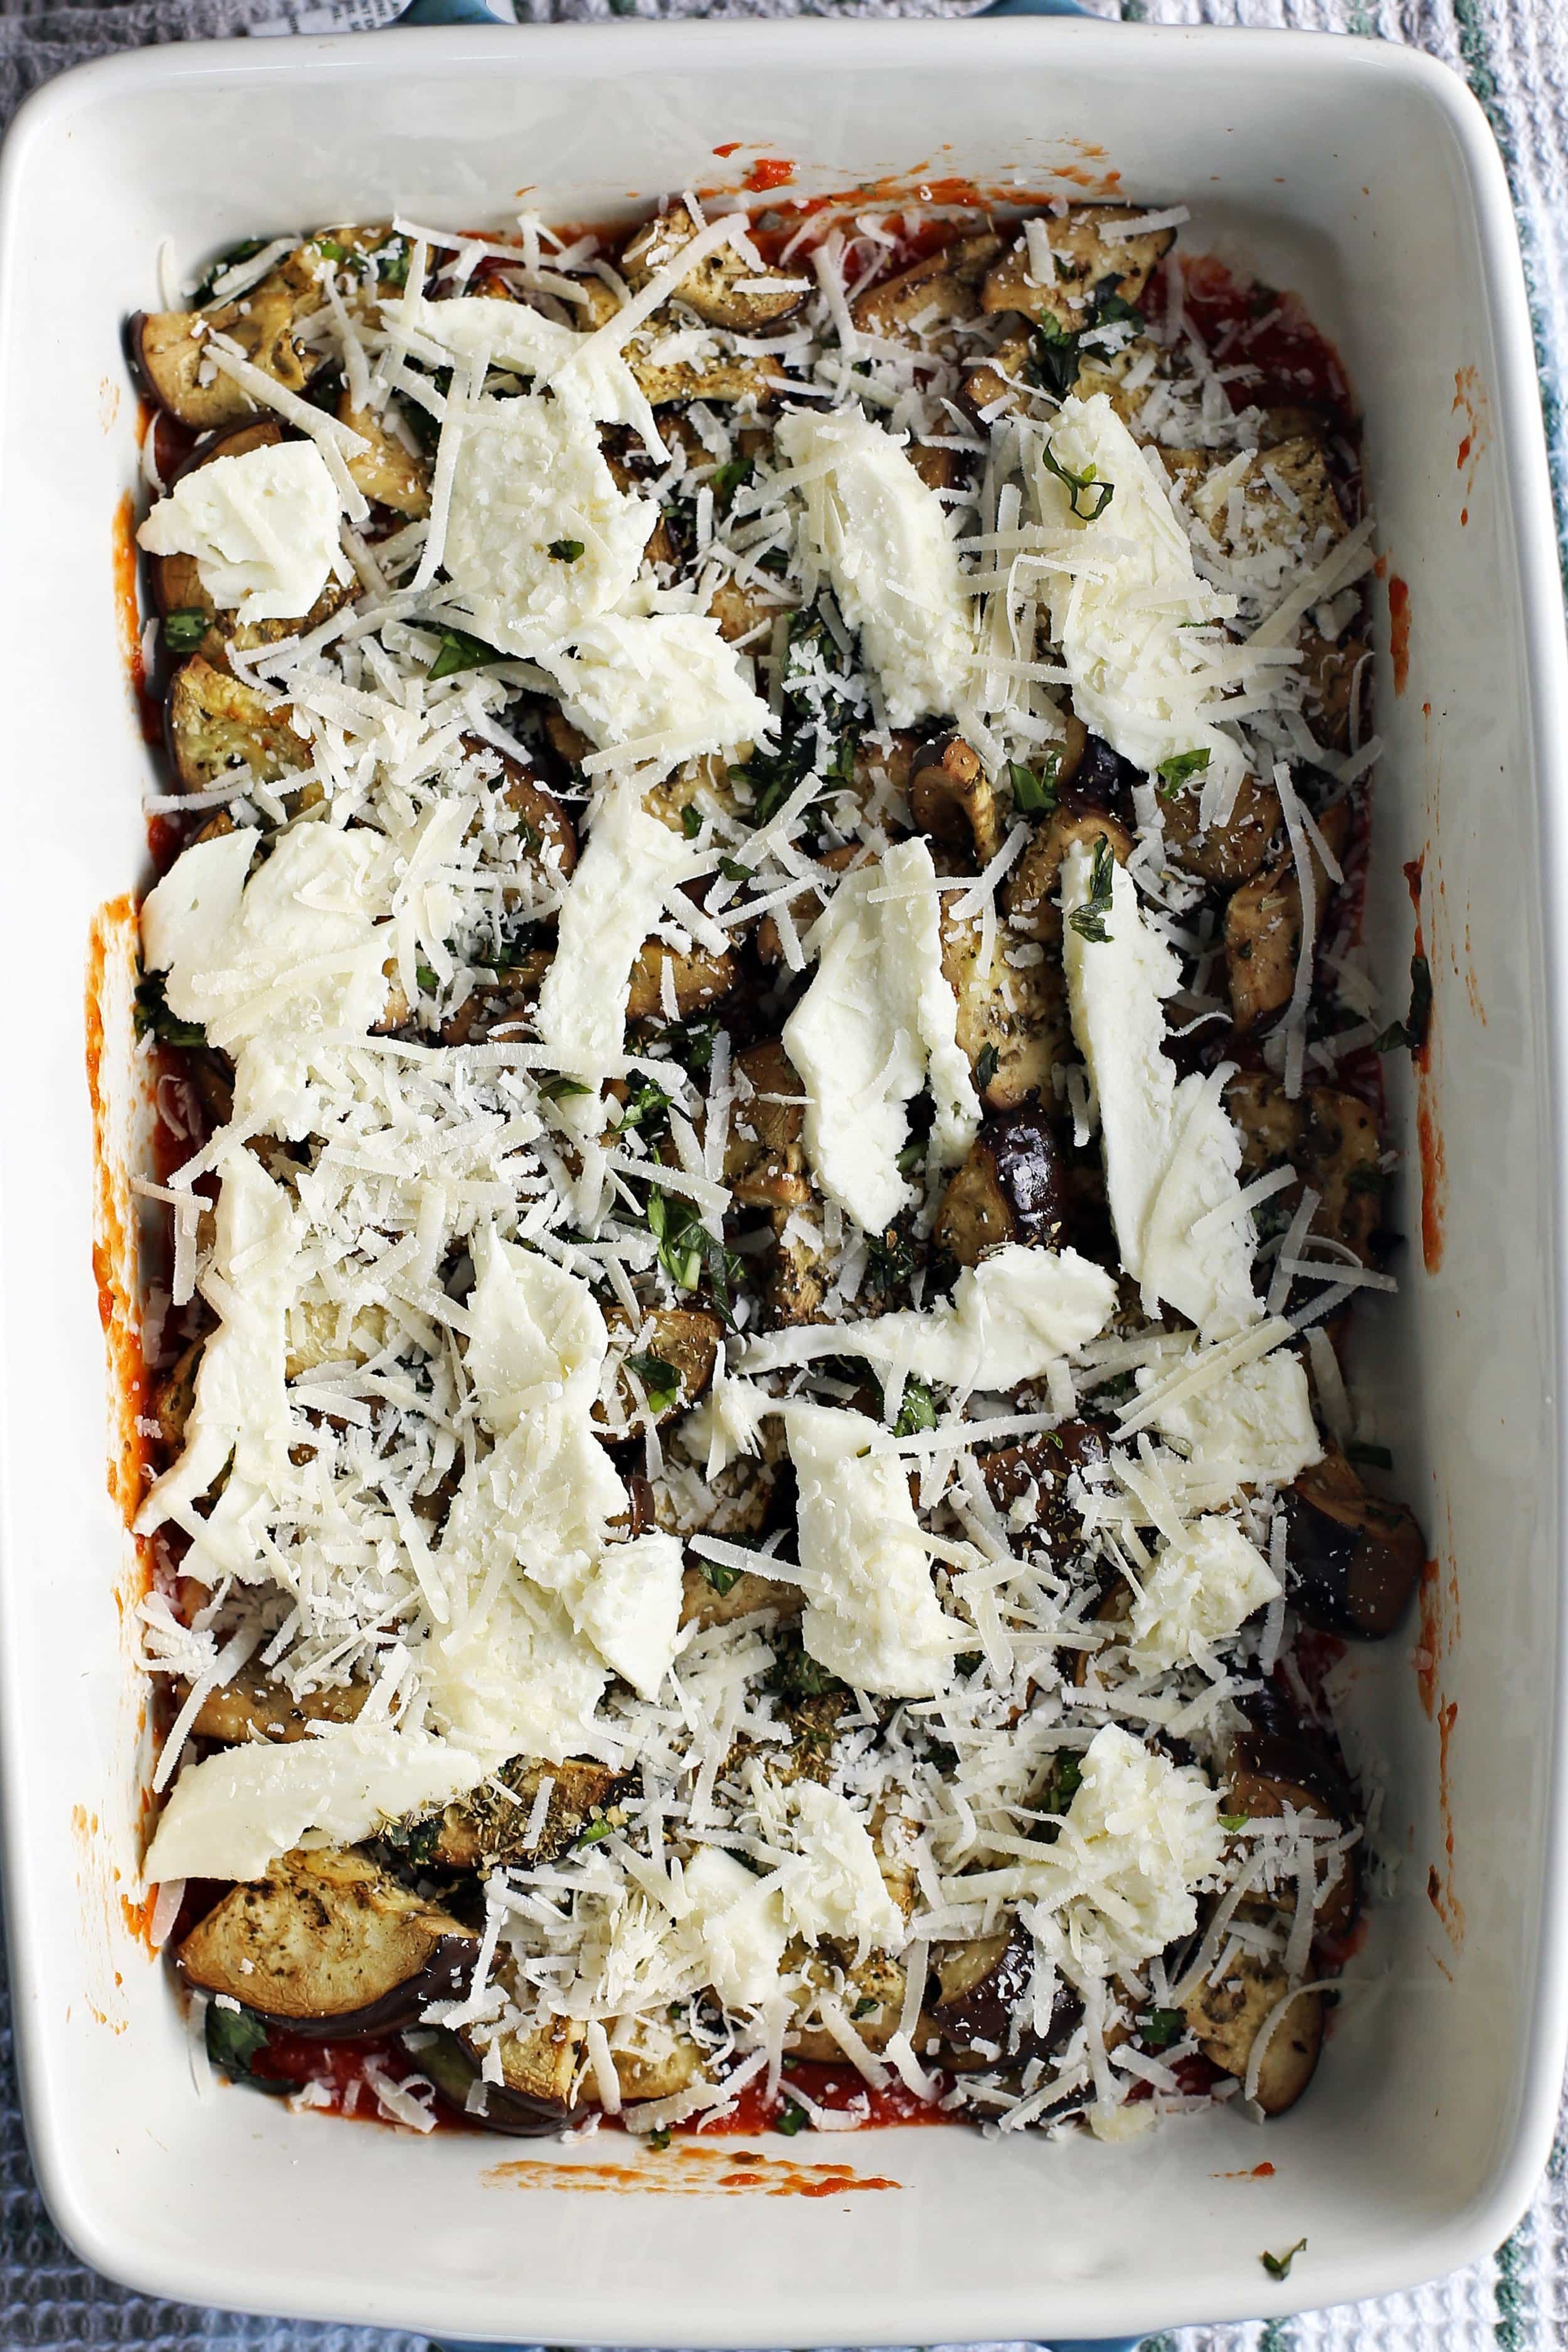 A large casserole dish containing layers of marinara sauce, sliced eggplant, herbs, and cheeses.